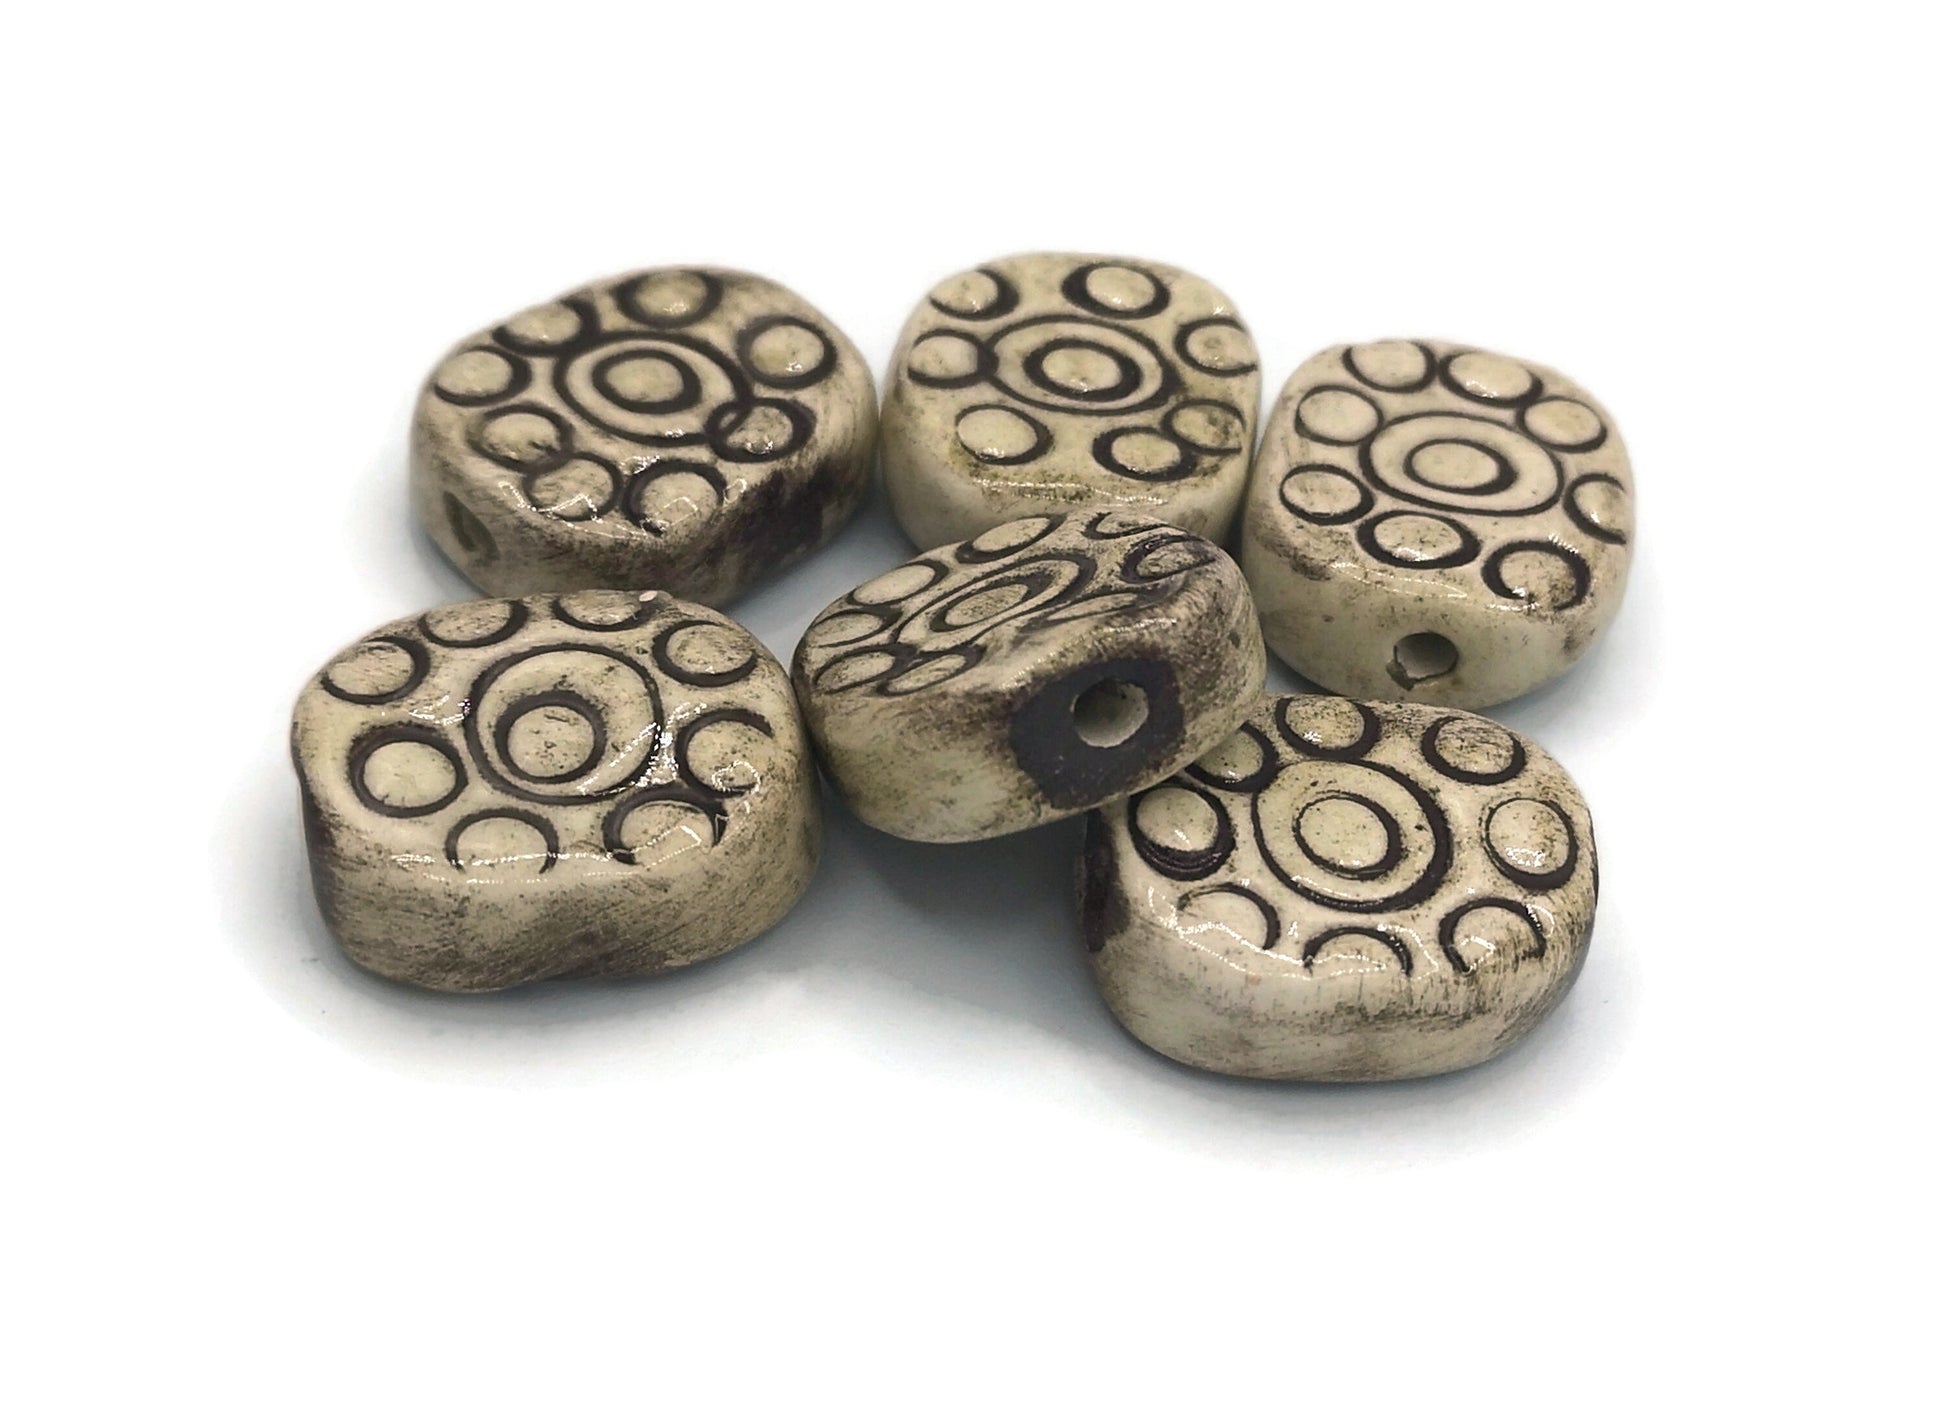 Handmade Ceramic Beads, Unique Clay Jewelry Beads, Unusual Porcelain Beads, Decorative Oval Beads For Crafts - Ceramica Ana Rafael